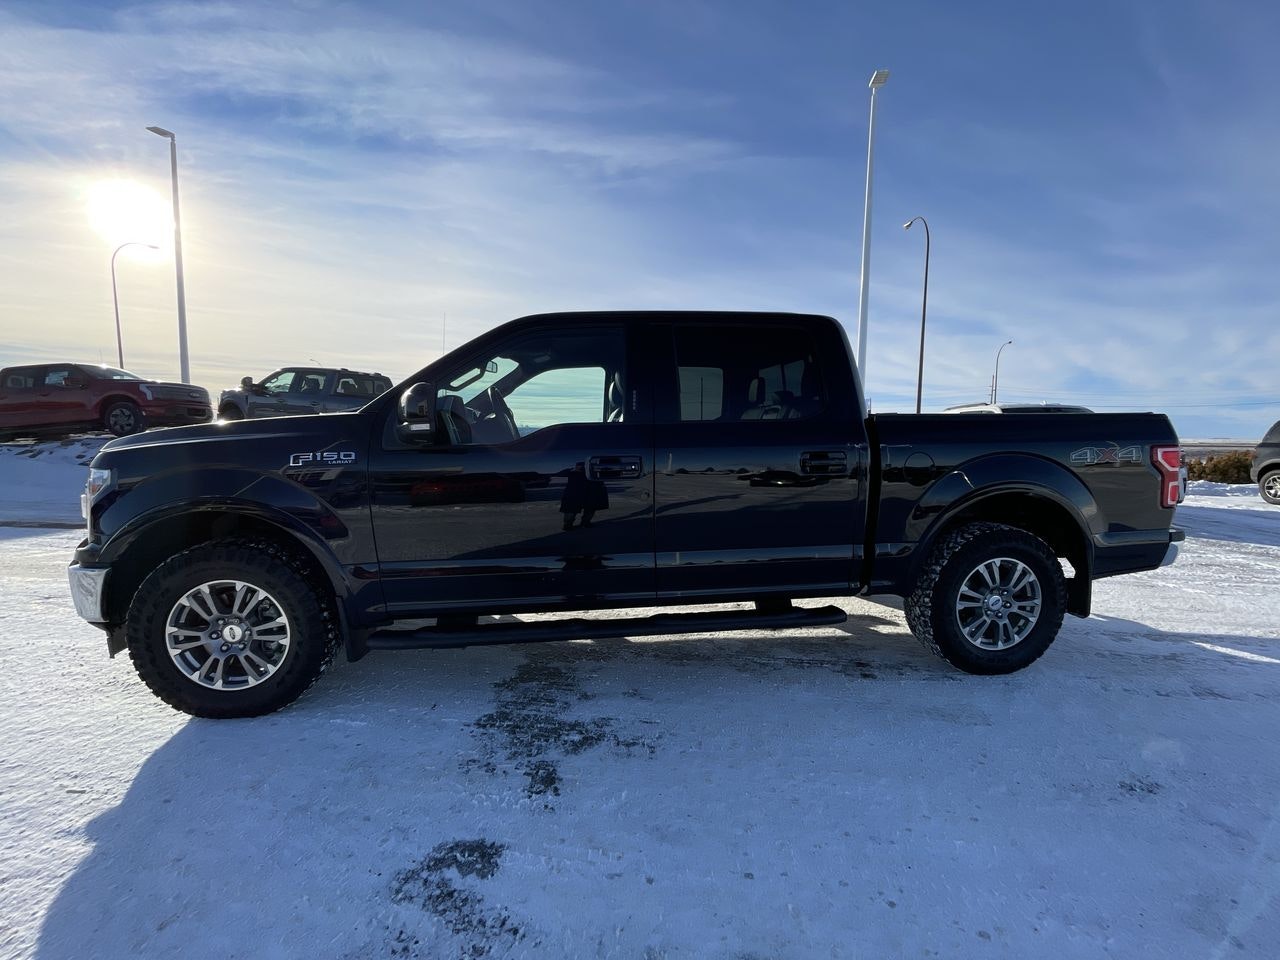 2018 Ford F-150 Crew Cab 4x4 Lariat HEATED/COOLED LEATHER SEATS REMOTE START (U4367) Main Image